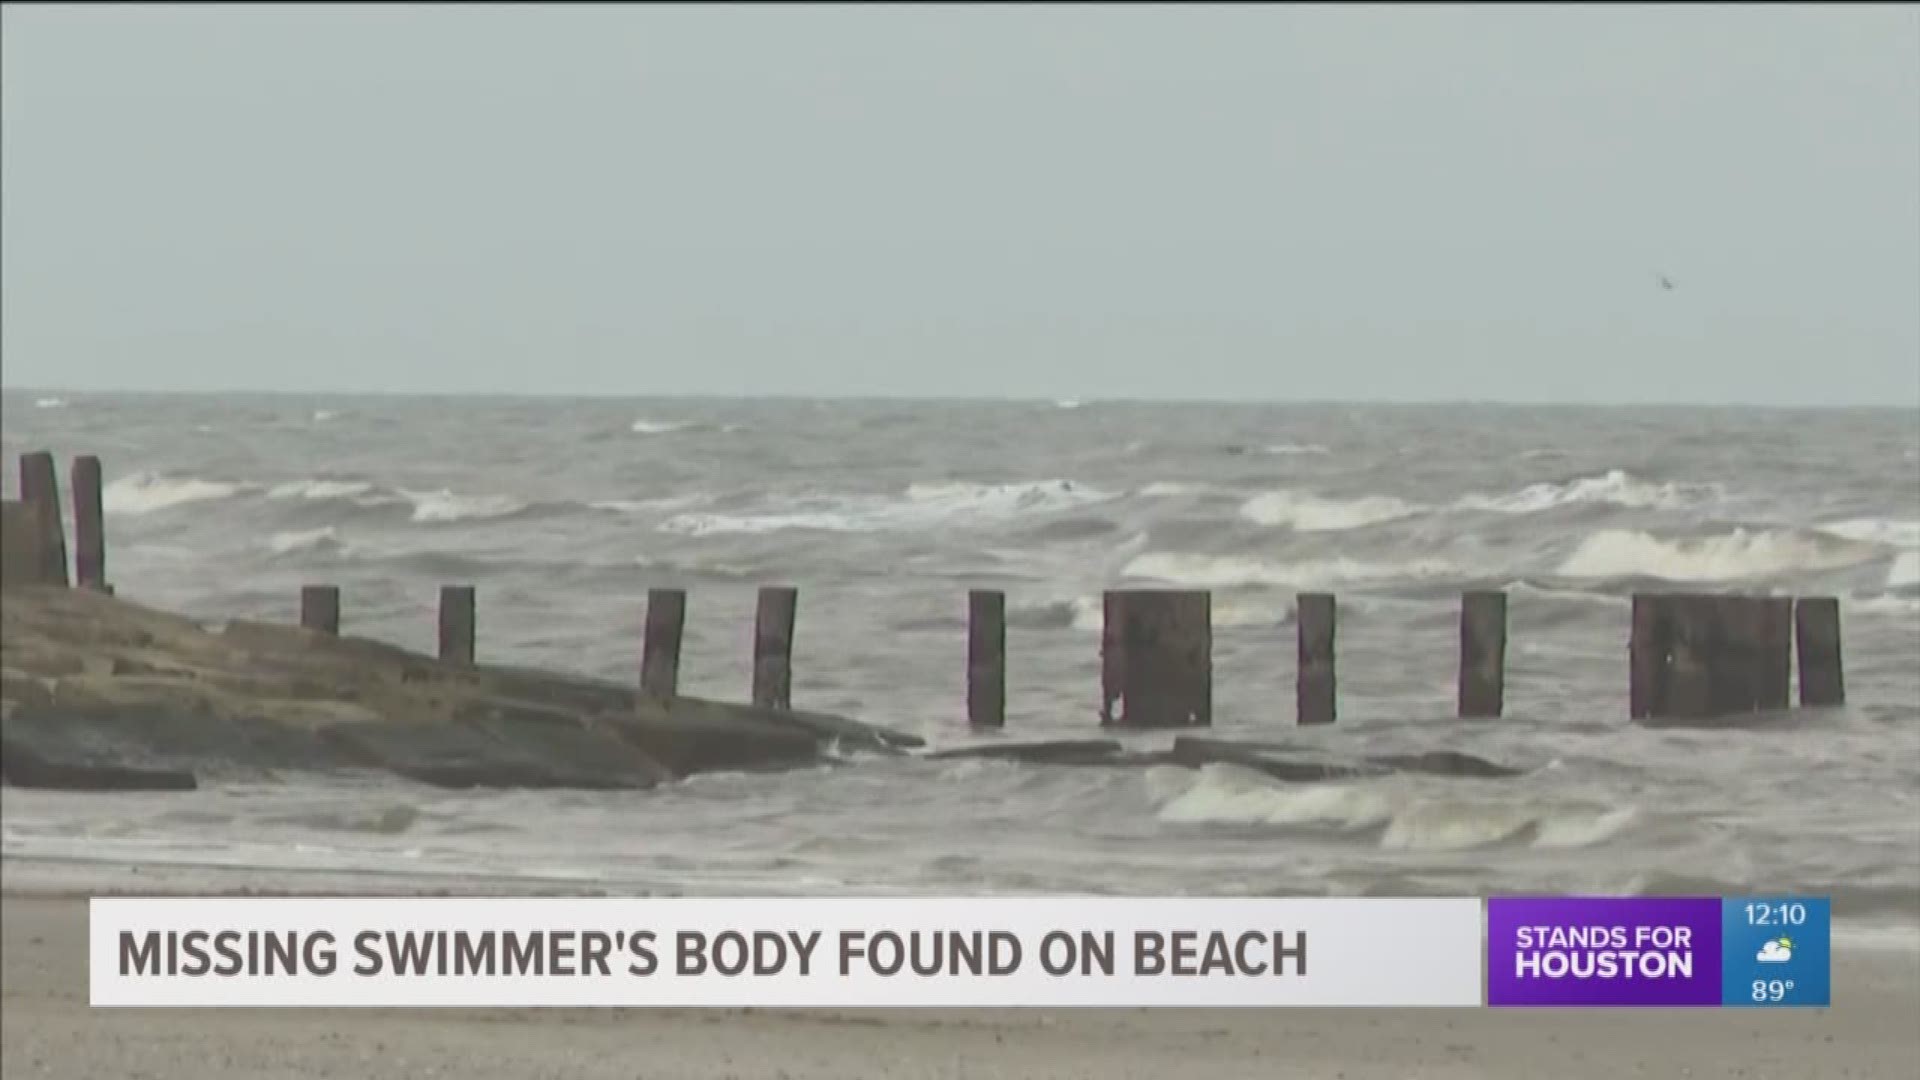 The Coast Guard has ended their search for a missing swimmer after the man's body was found Tuesday morning.